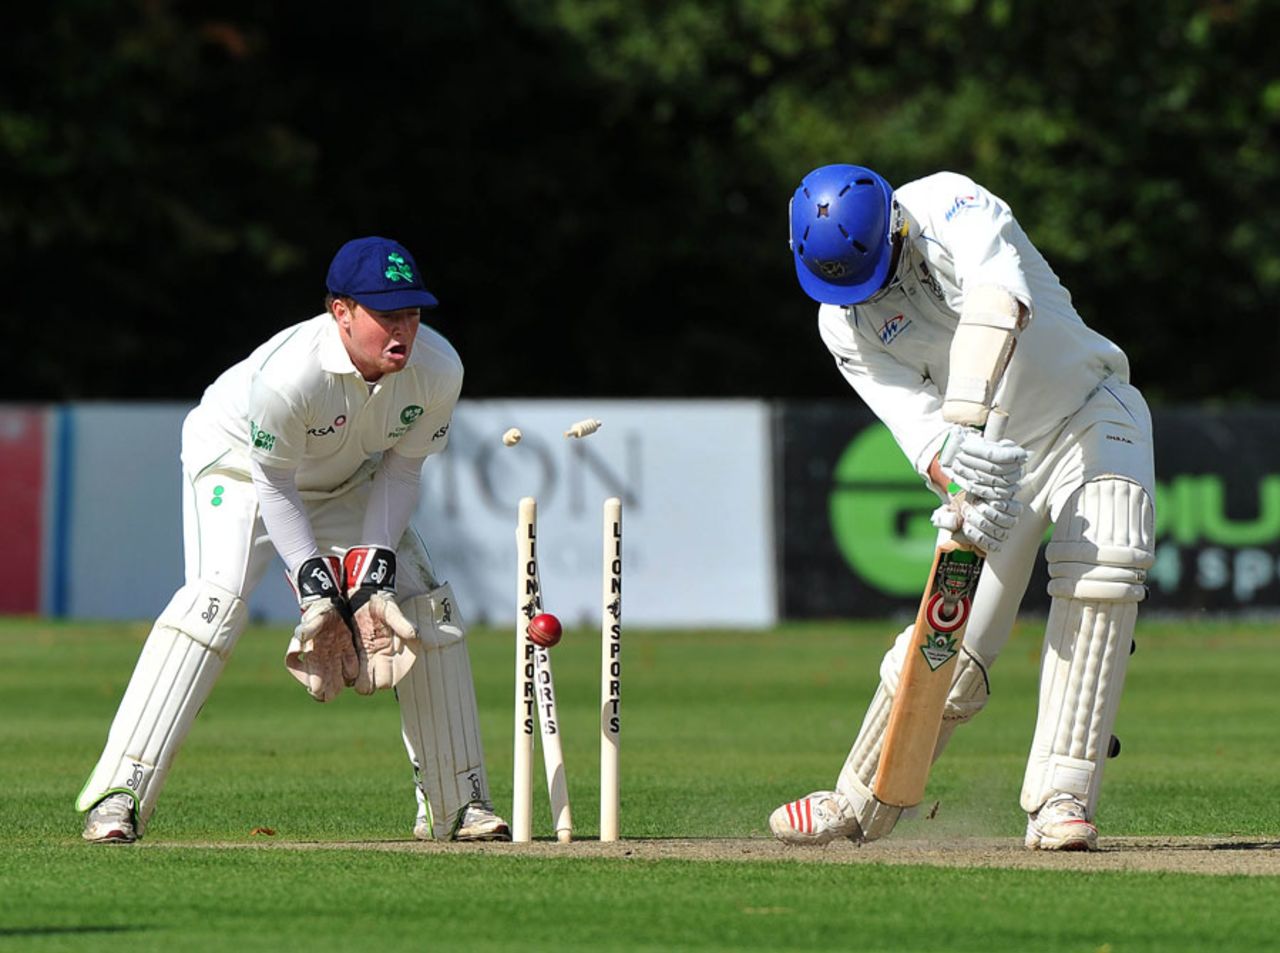 Gerrie Snyman is bowled by George Dockrell for 25, Ireland v Namibia, Intercontinental Cup, 1st day, Belfast, September 6, 2011